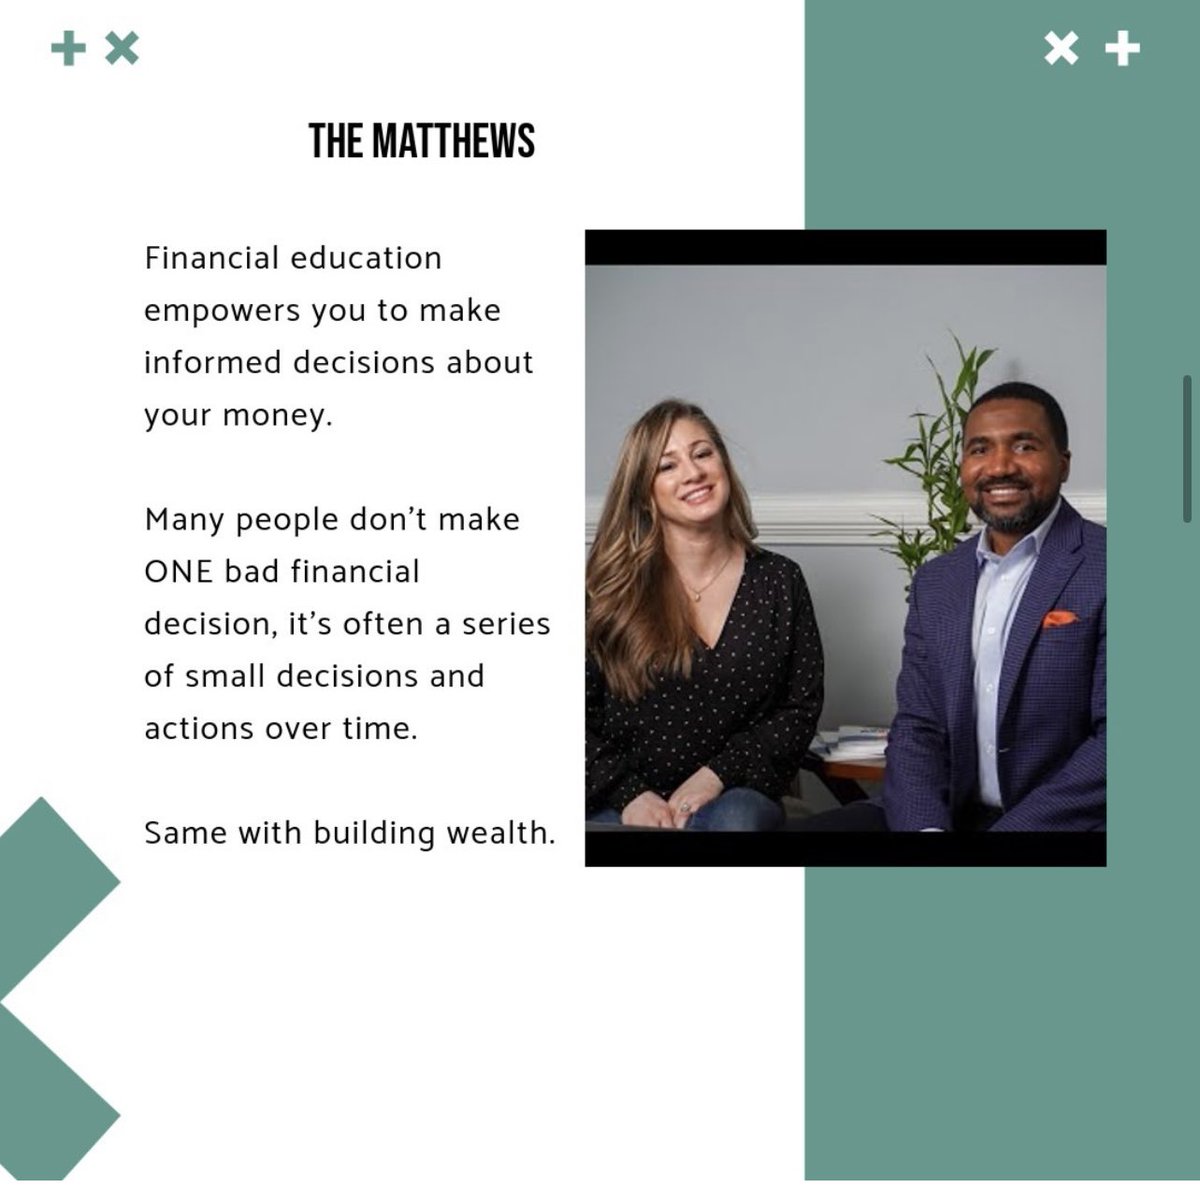 Financial education empowers you to make informed decisions about your money. Many people don't make ONE bad financial decision, it's often a series of small decisions and actions over time. Same with building wealth. If you want to create more certainty in your finances DM or…